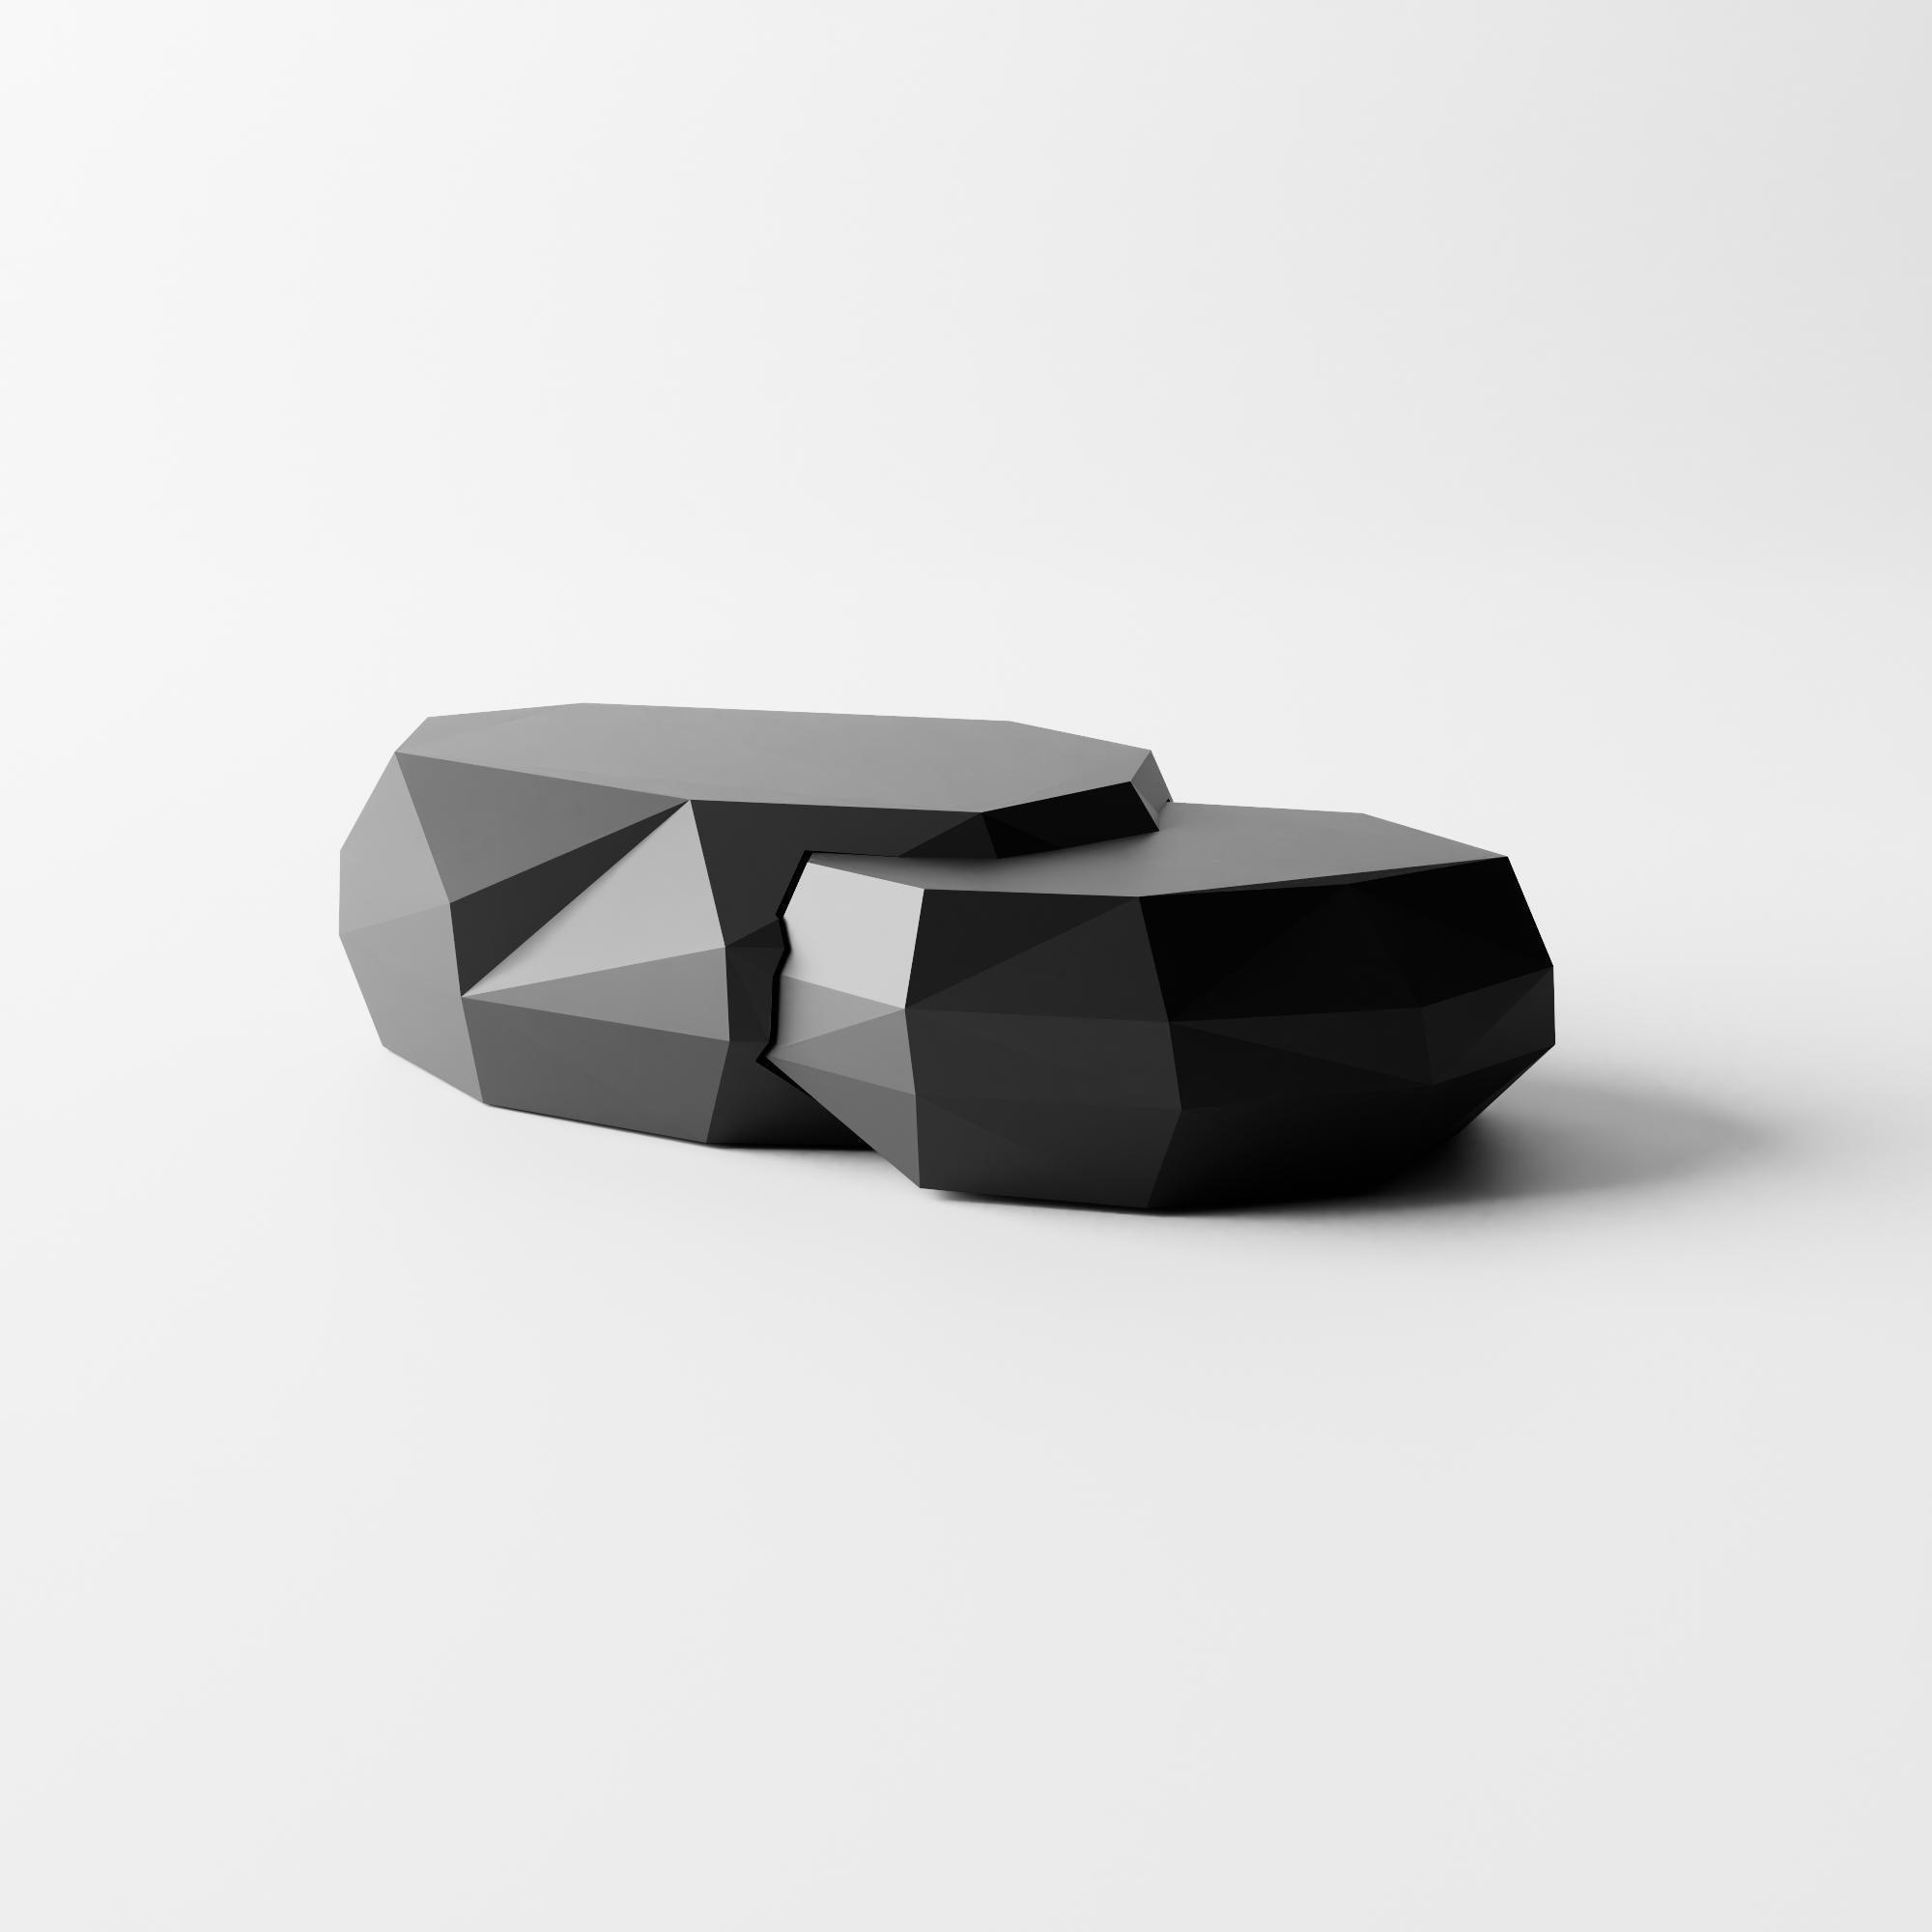 Black diamond coffee table by Kasadamo
PROJECT WITH PANT
Dimensions: D 98 x W 140 x H 40 cm
Materials: 3D print development, bio-plasty, bio resin, linen fiber, metal finishes when necessary.
Also Available: Other colors